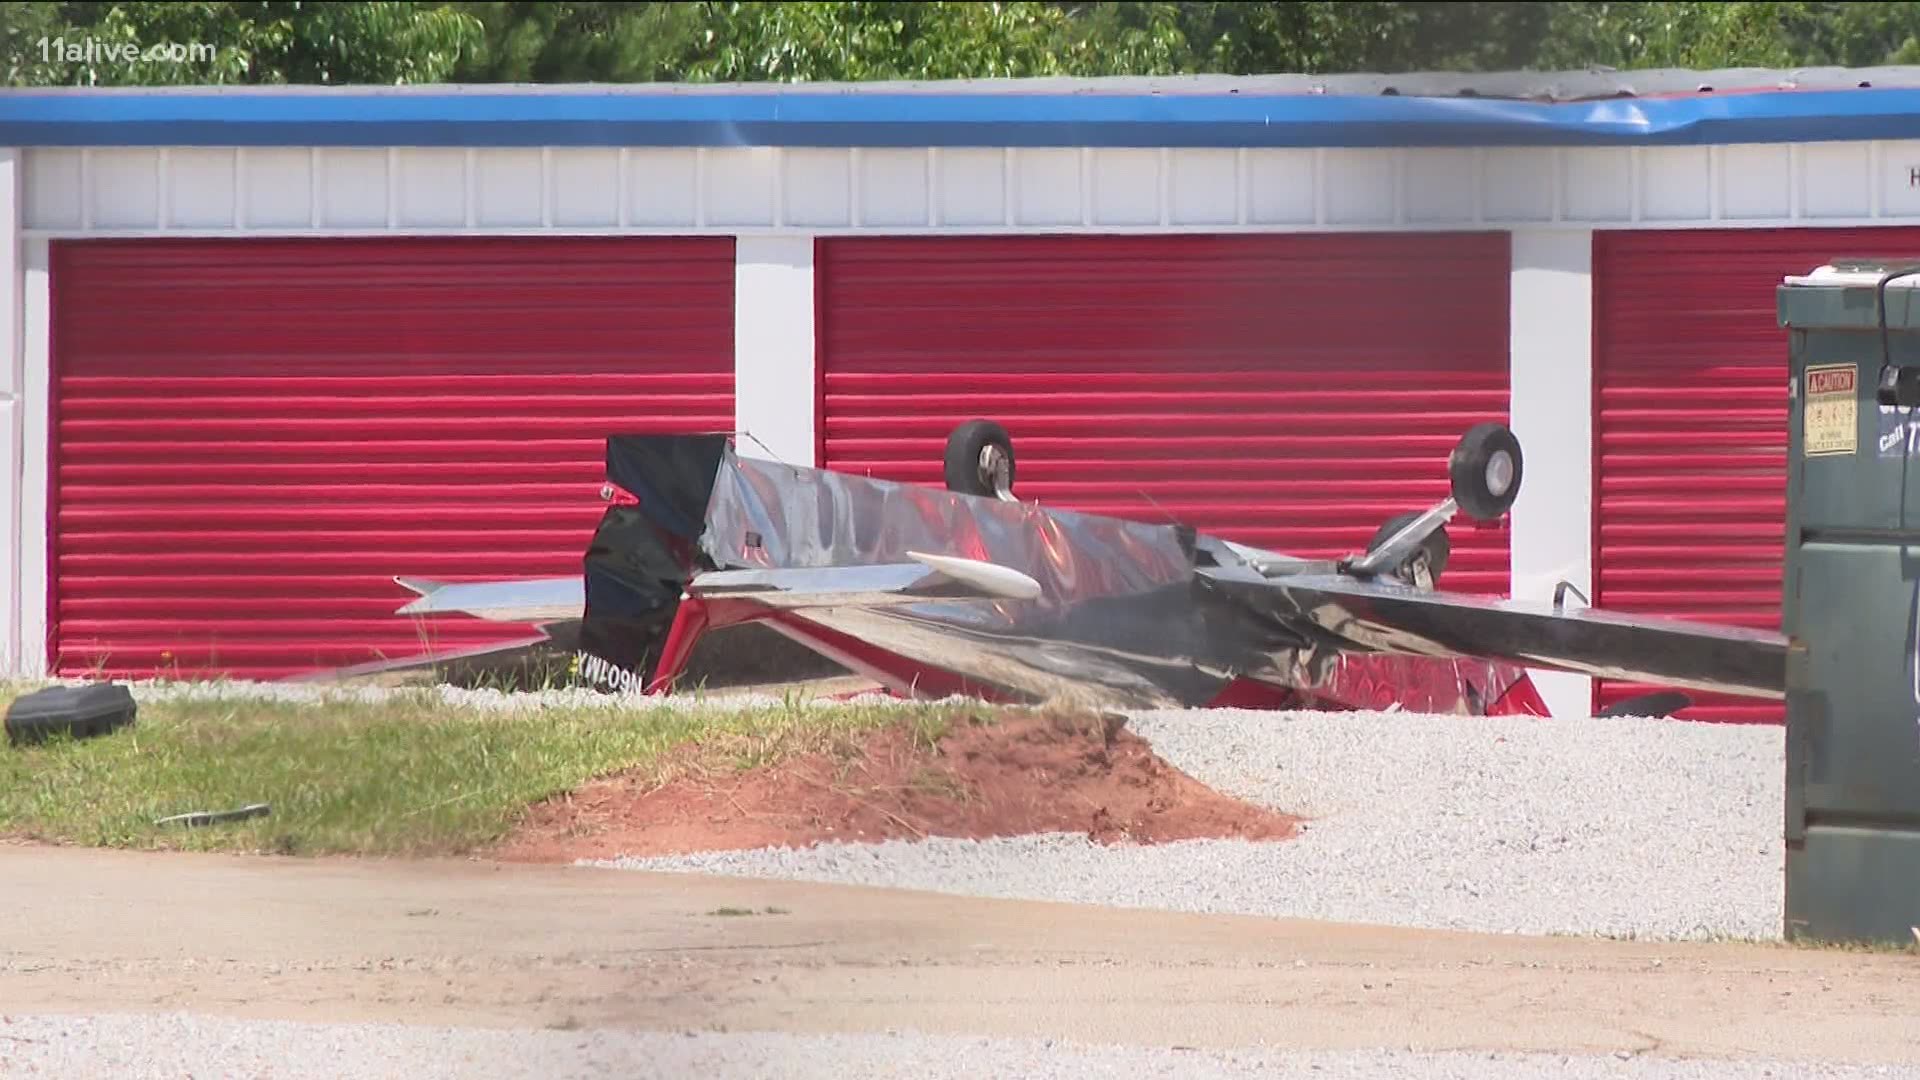 Officials in Barrow County reported a small plane crashed into warehouses on Saturday morning.